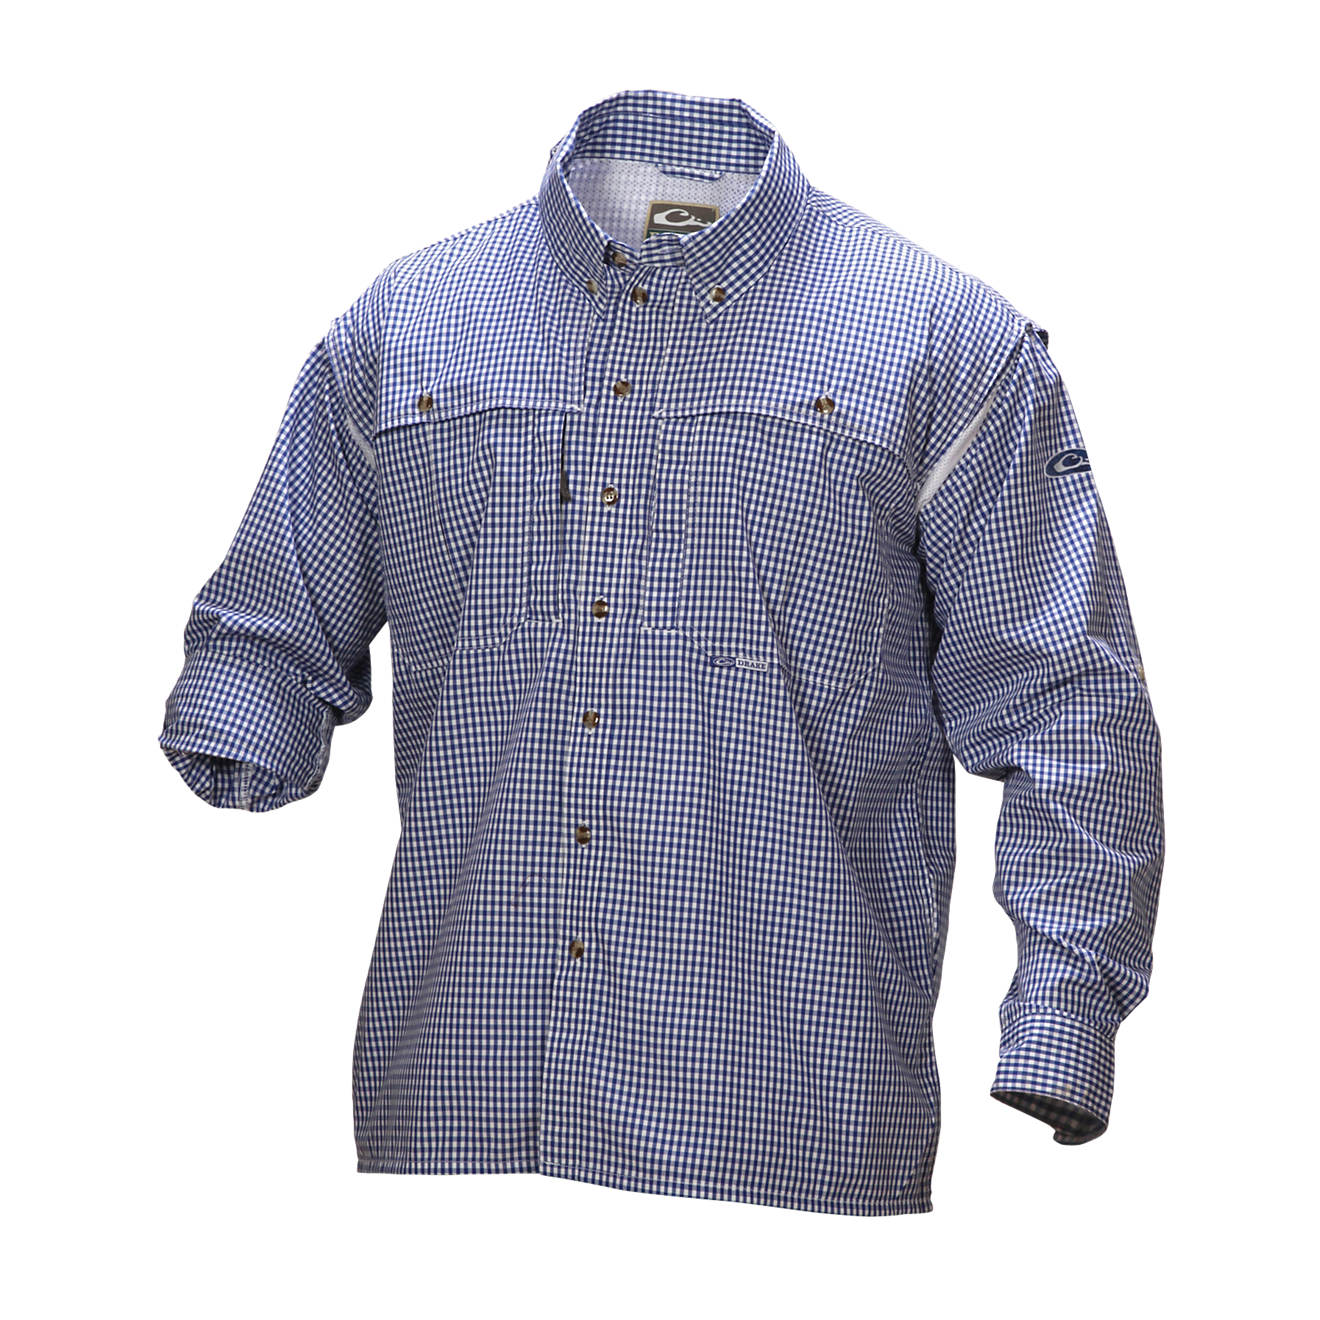 Sweatwater Mens Outdoor Breathable Sports Button Down Long-Sleeve Shirts 